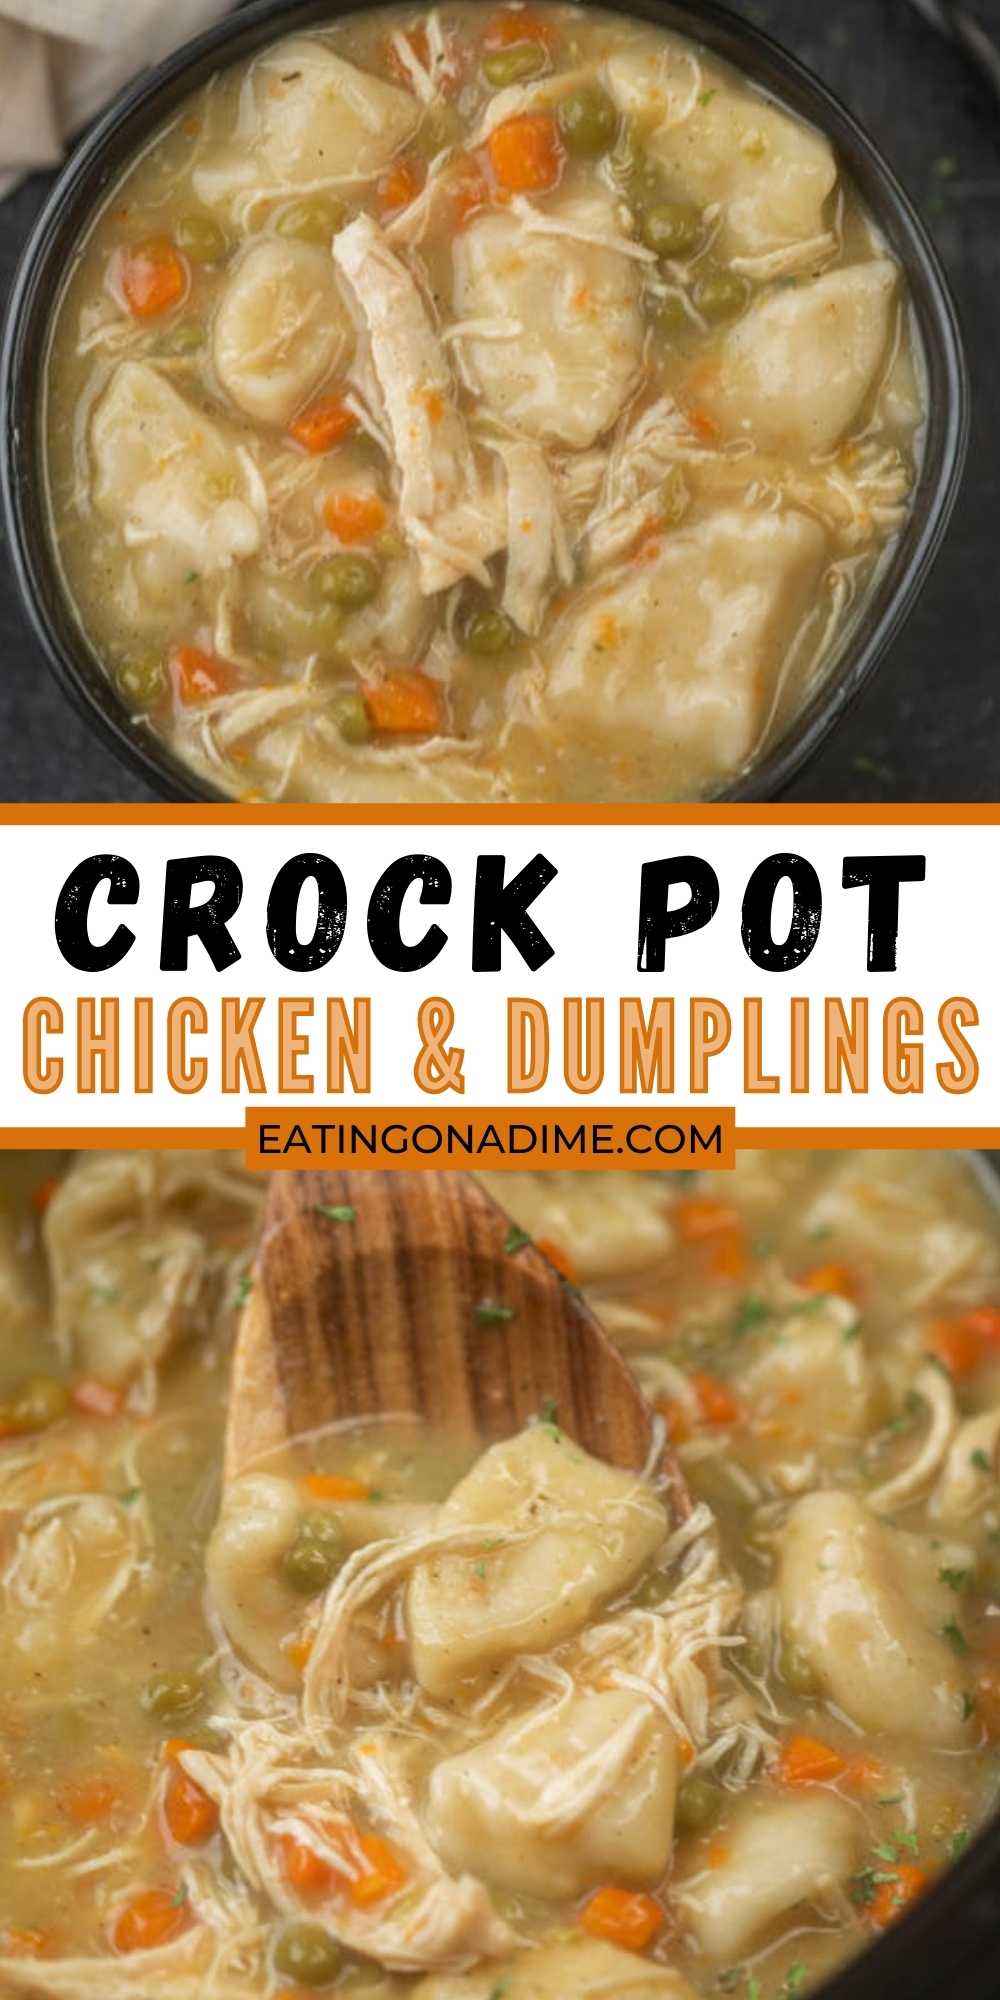 Crockpot chicken and dumplings make dinner time easy thanks to the ease of the slow cooker. Enjoy easy and tasty chicken and dumplings with biscuits.  The entire family will love this crock pot chicken and dumplings recipe.  #eatingonadime #crockpotrecipes #slowcookerrecipes #chickenrecipes #dumplingrecipes 
